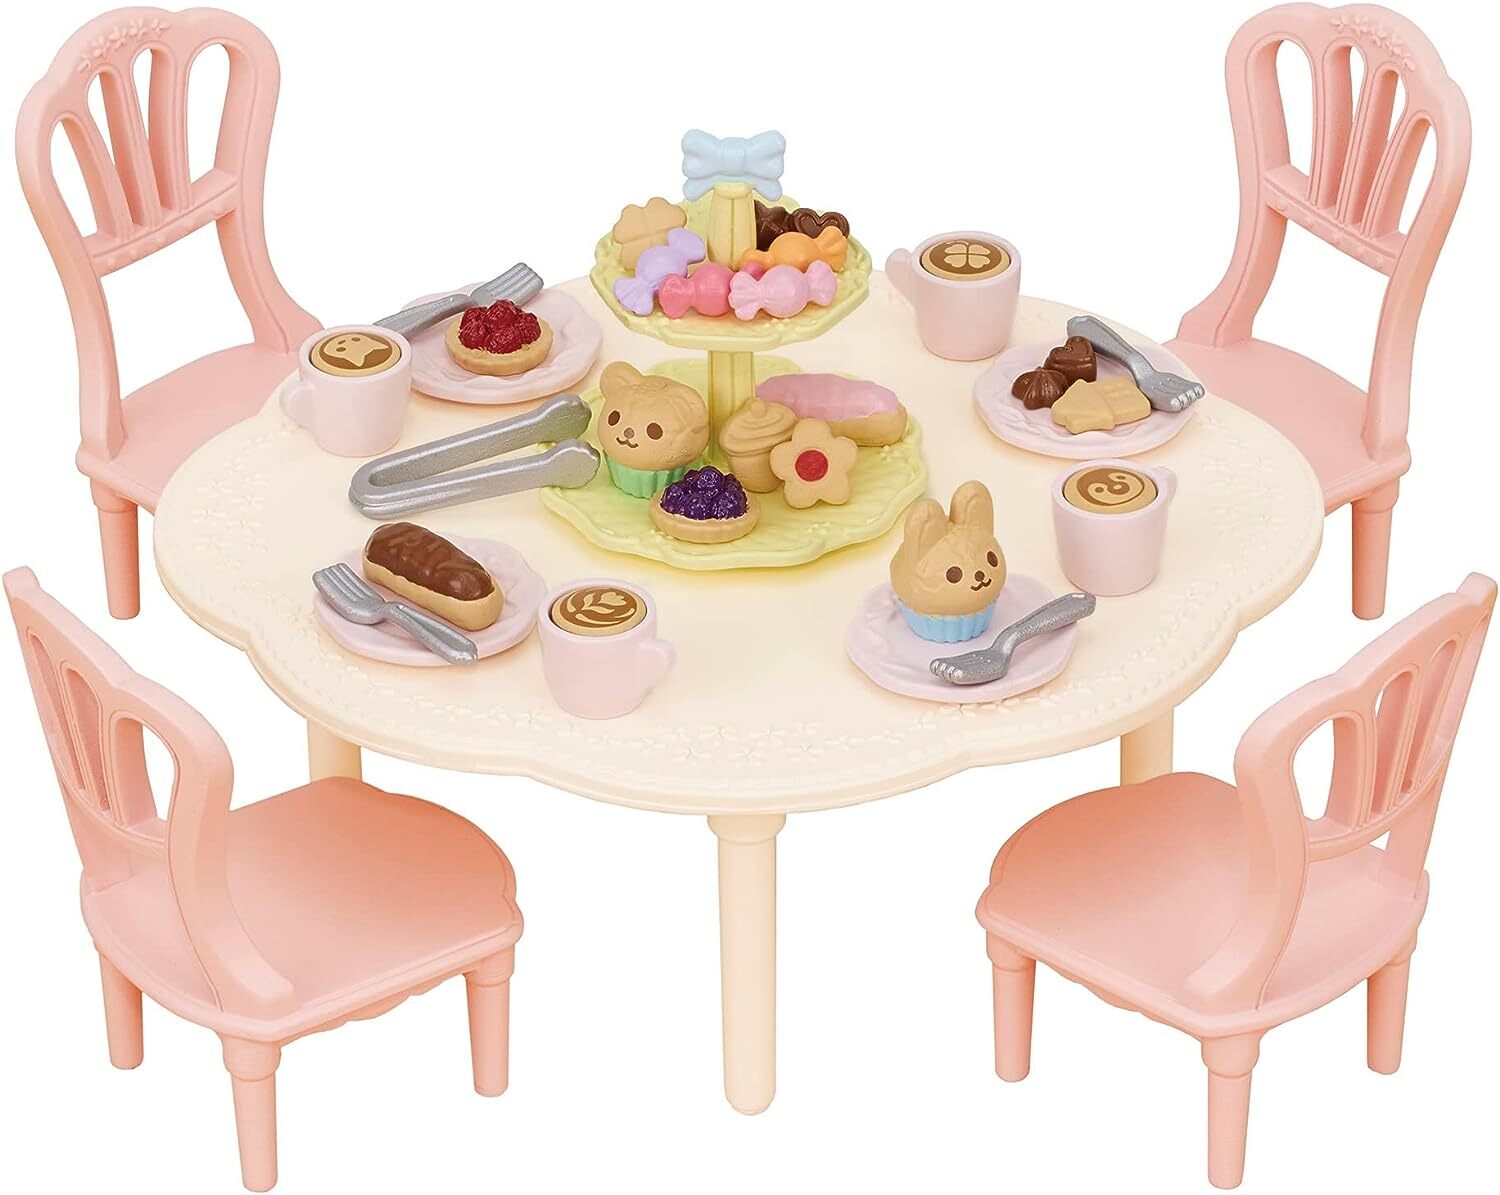 SF5742 Sweets Party Set